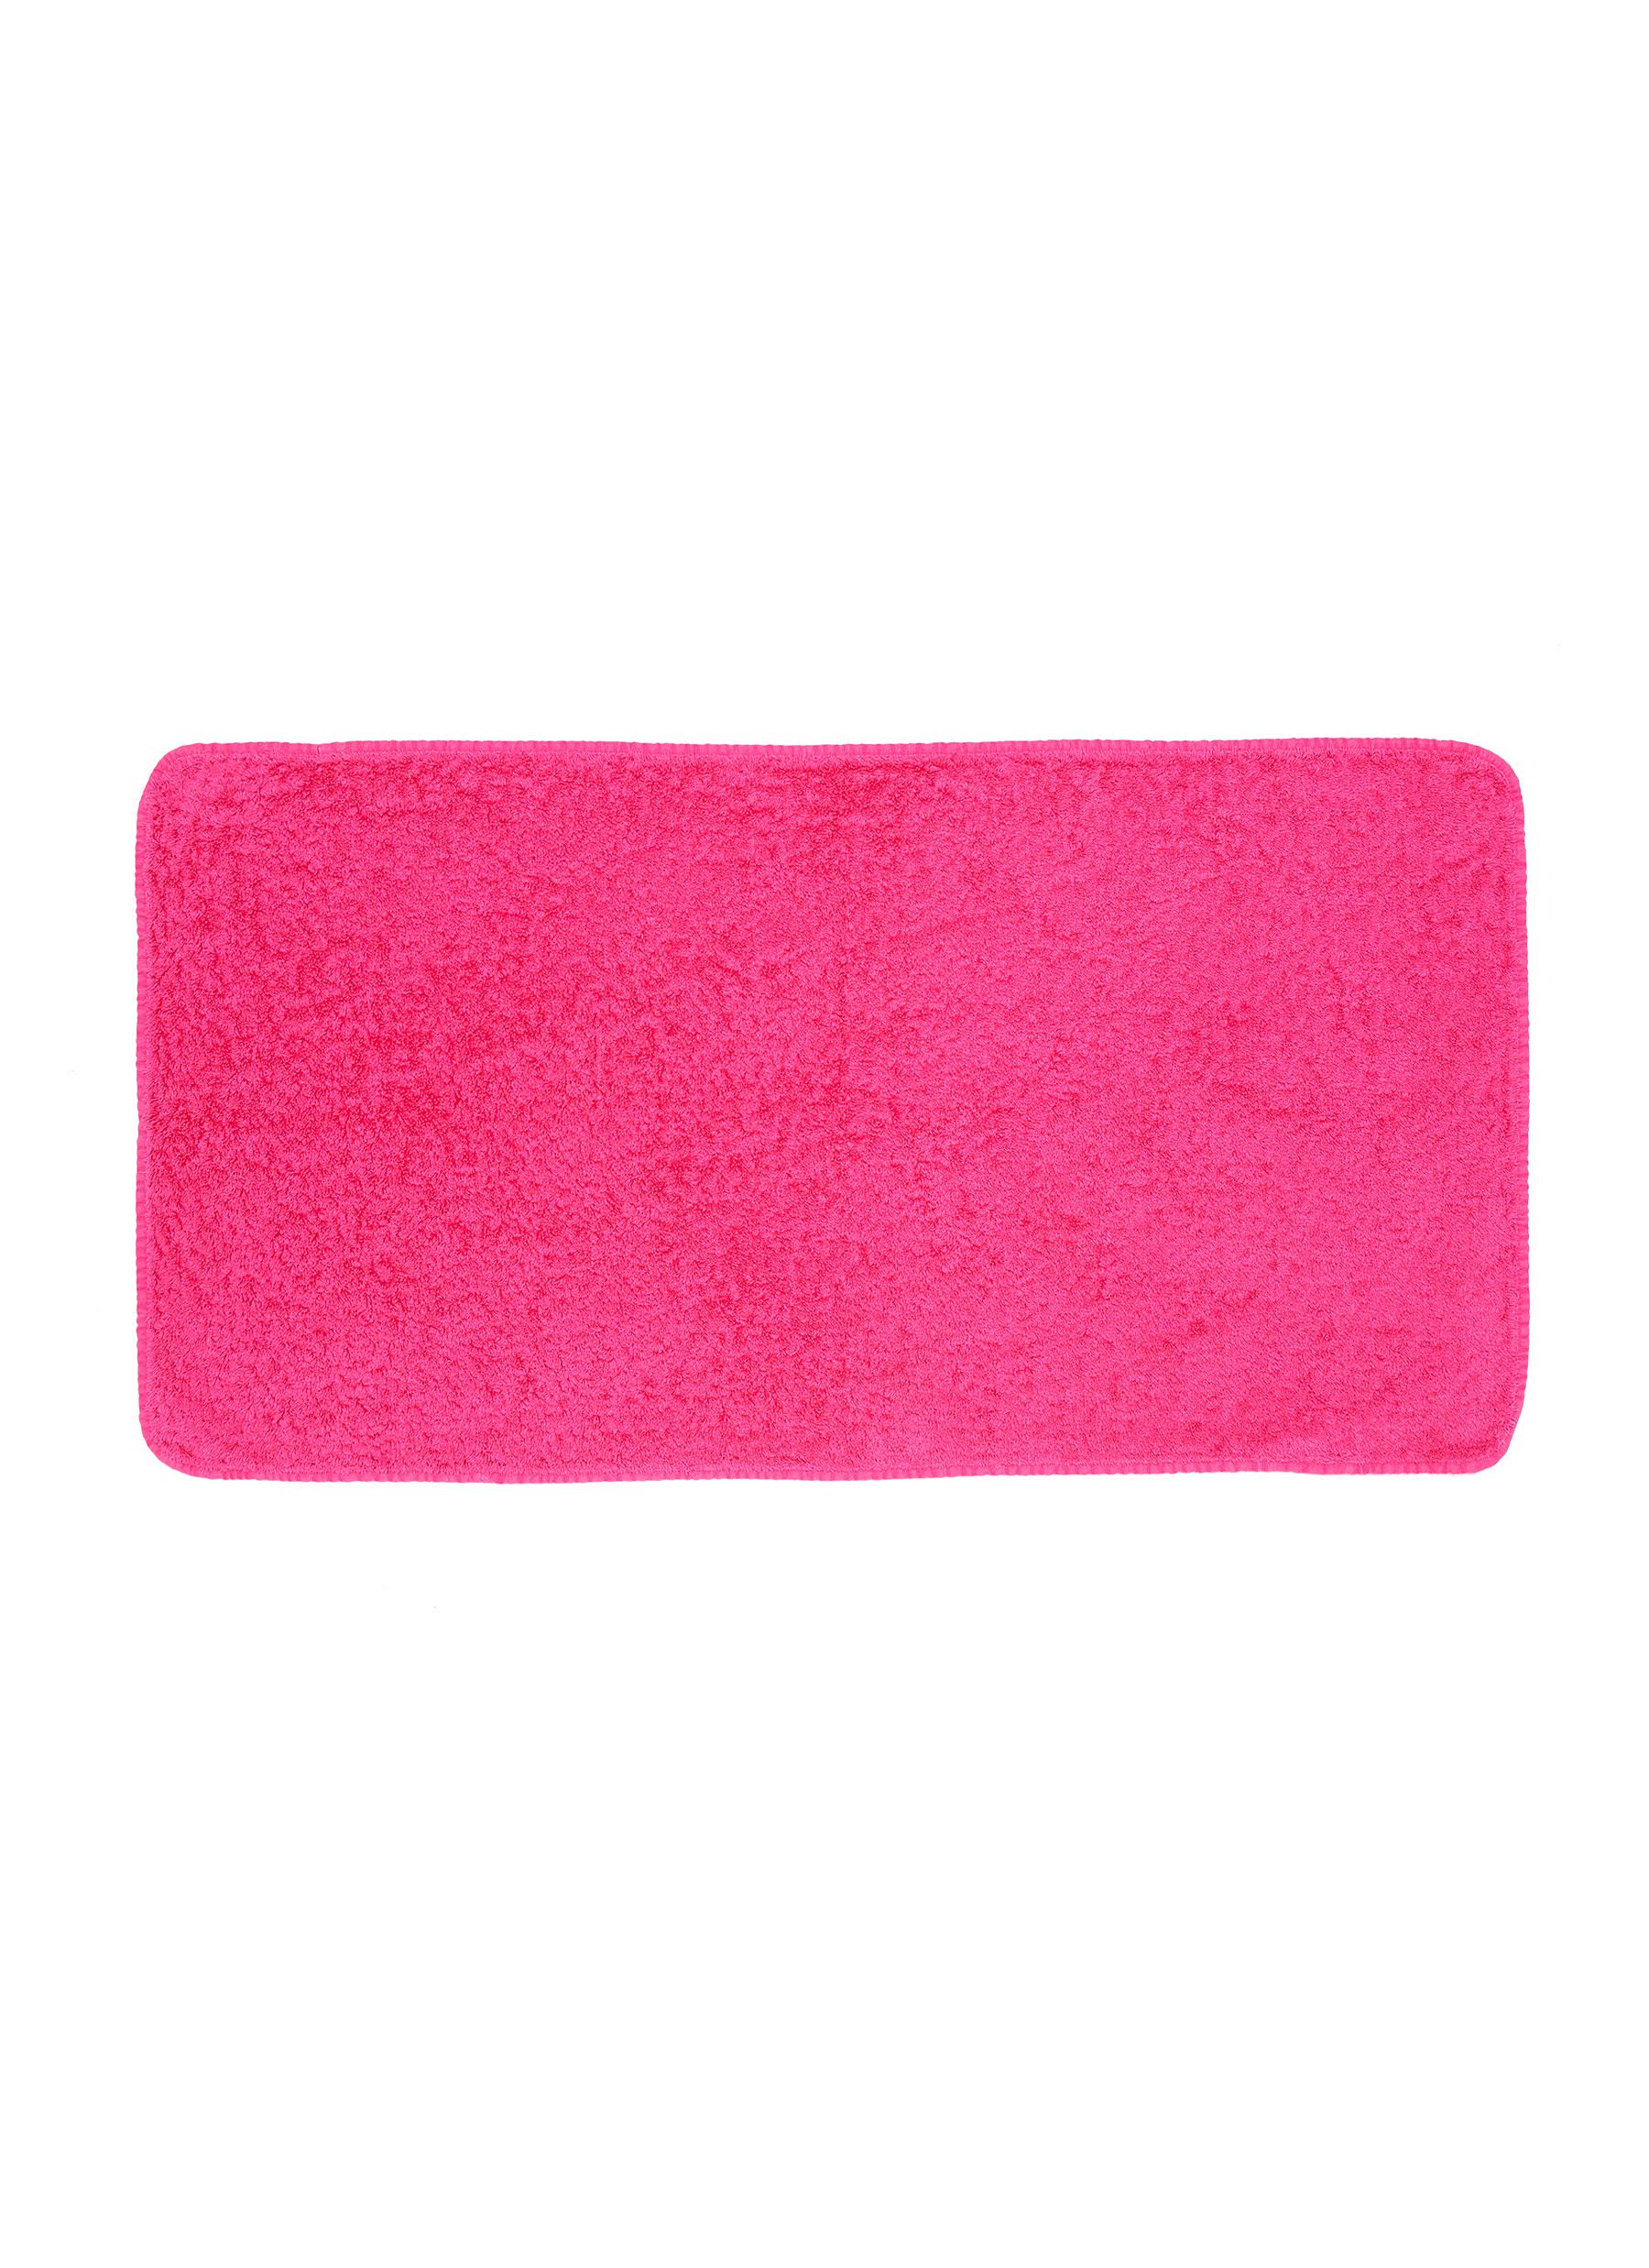 Abyss Super Pile Cotton Guest Towel - Happy Pink